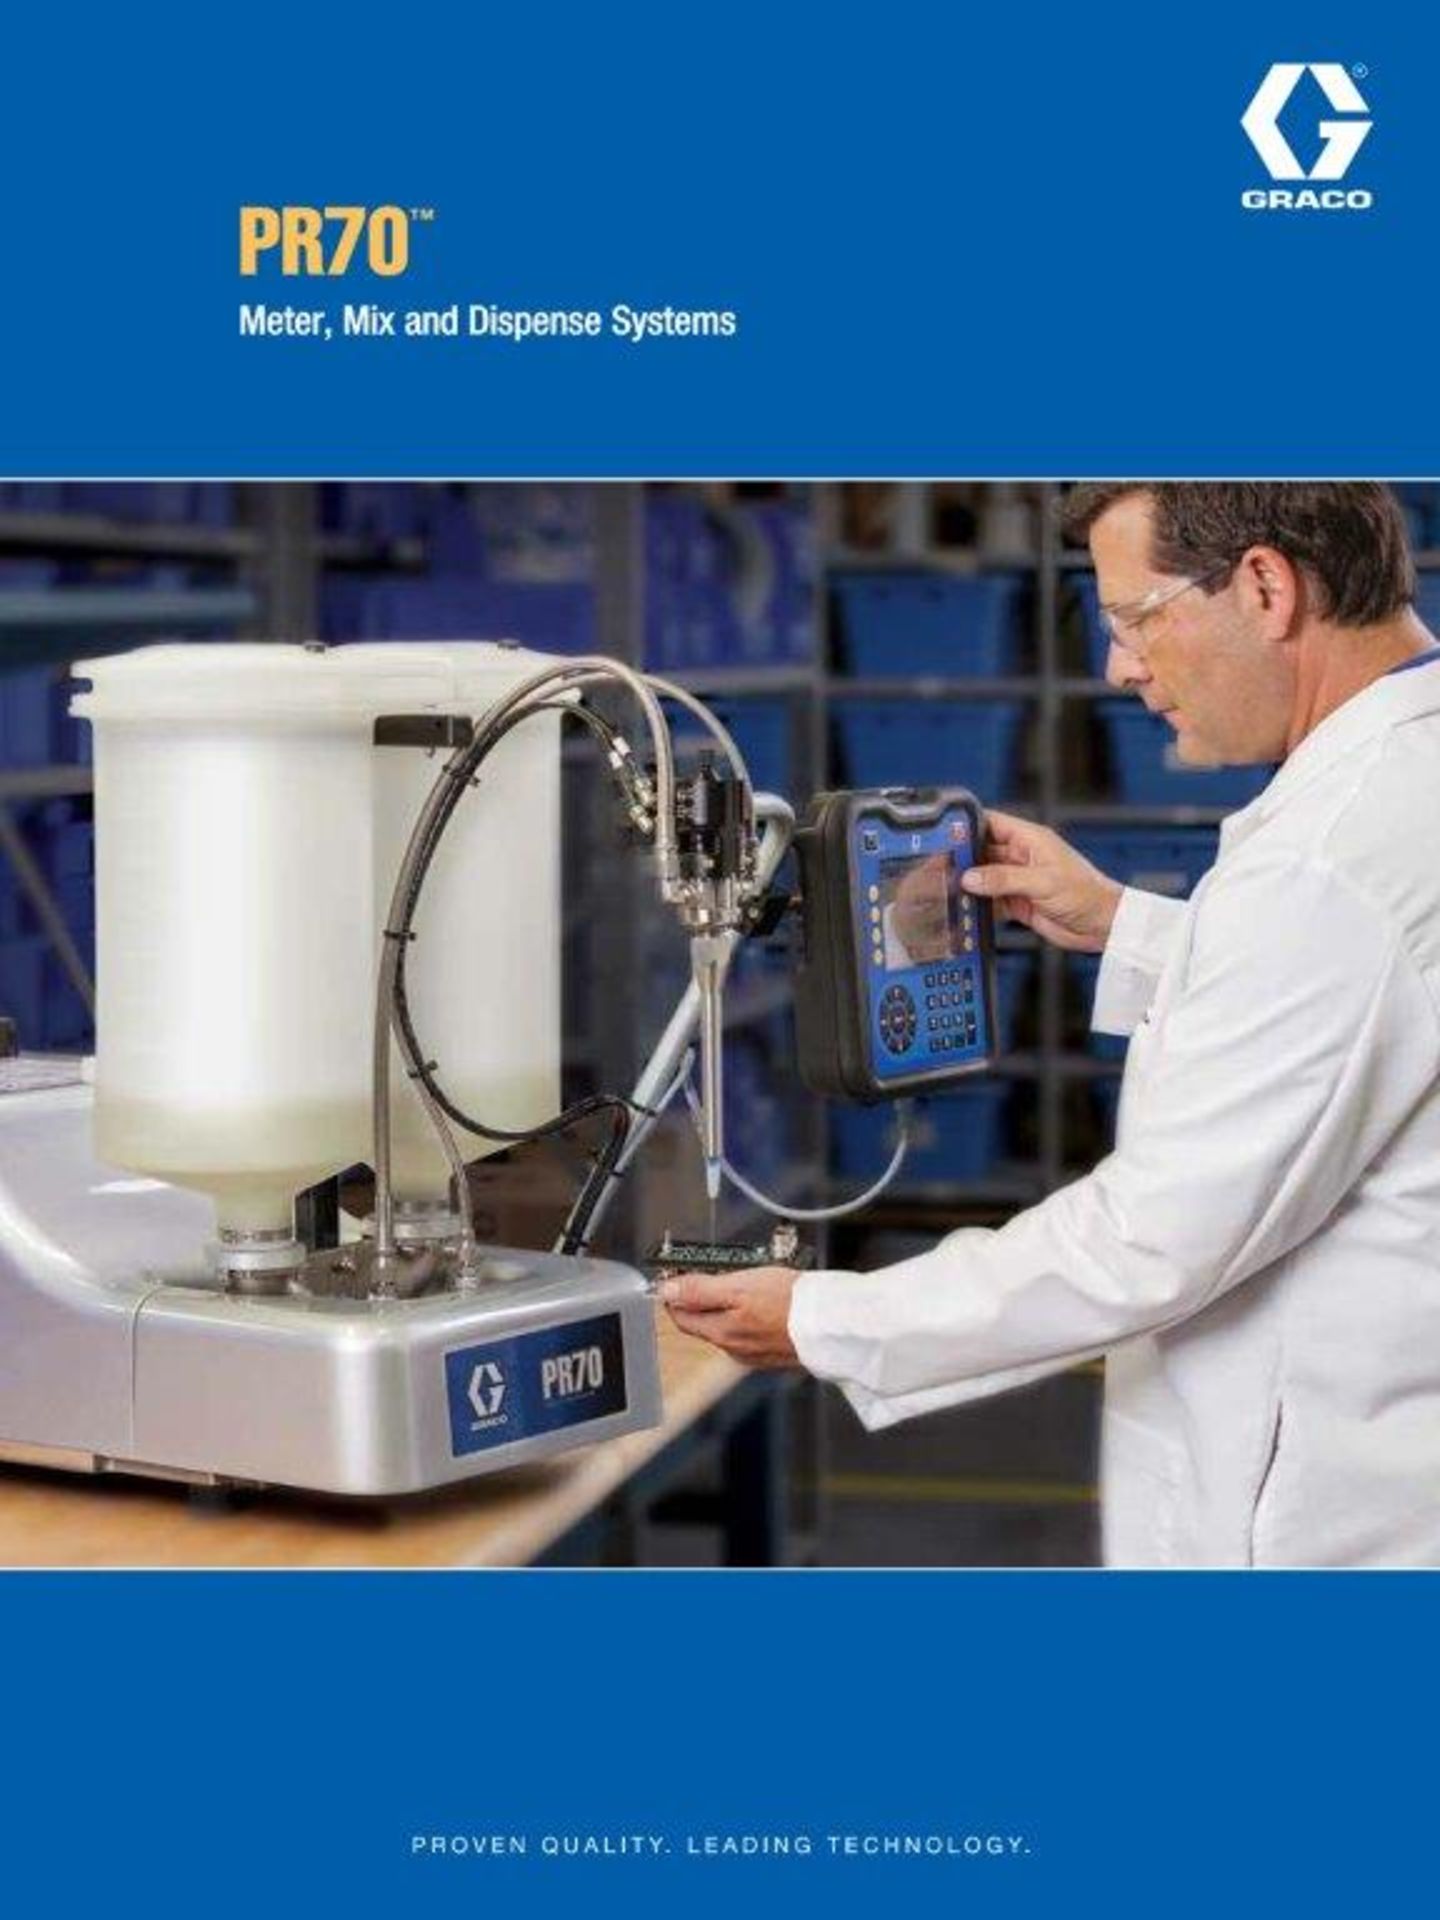 Graco PR70™ Meter, Mix and Dispense Systems (PDF manual available in photos) - Image 8 of 15